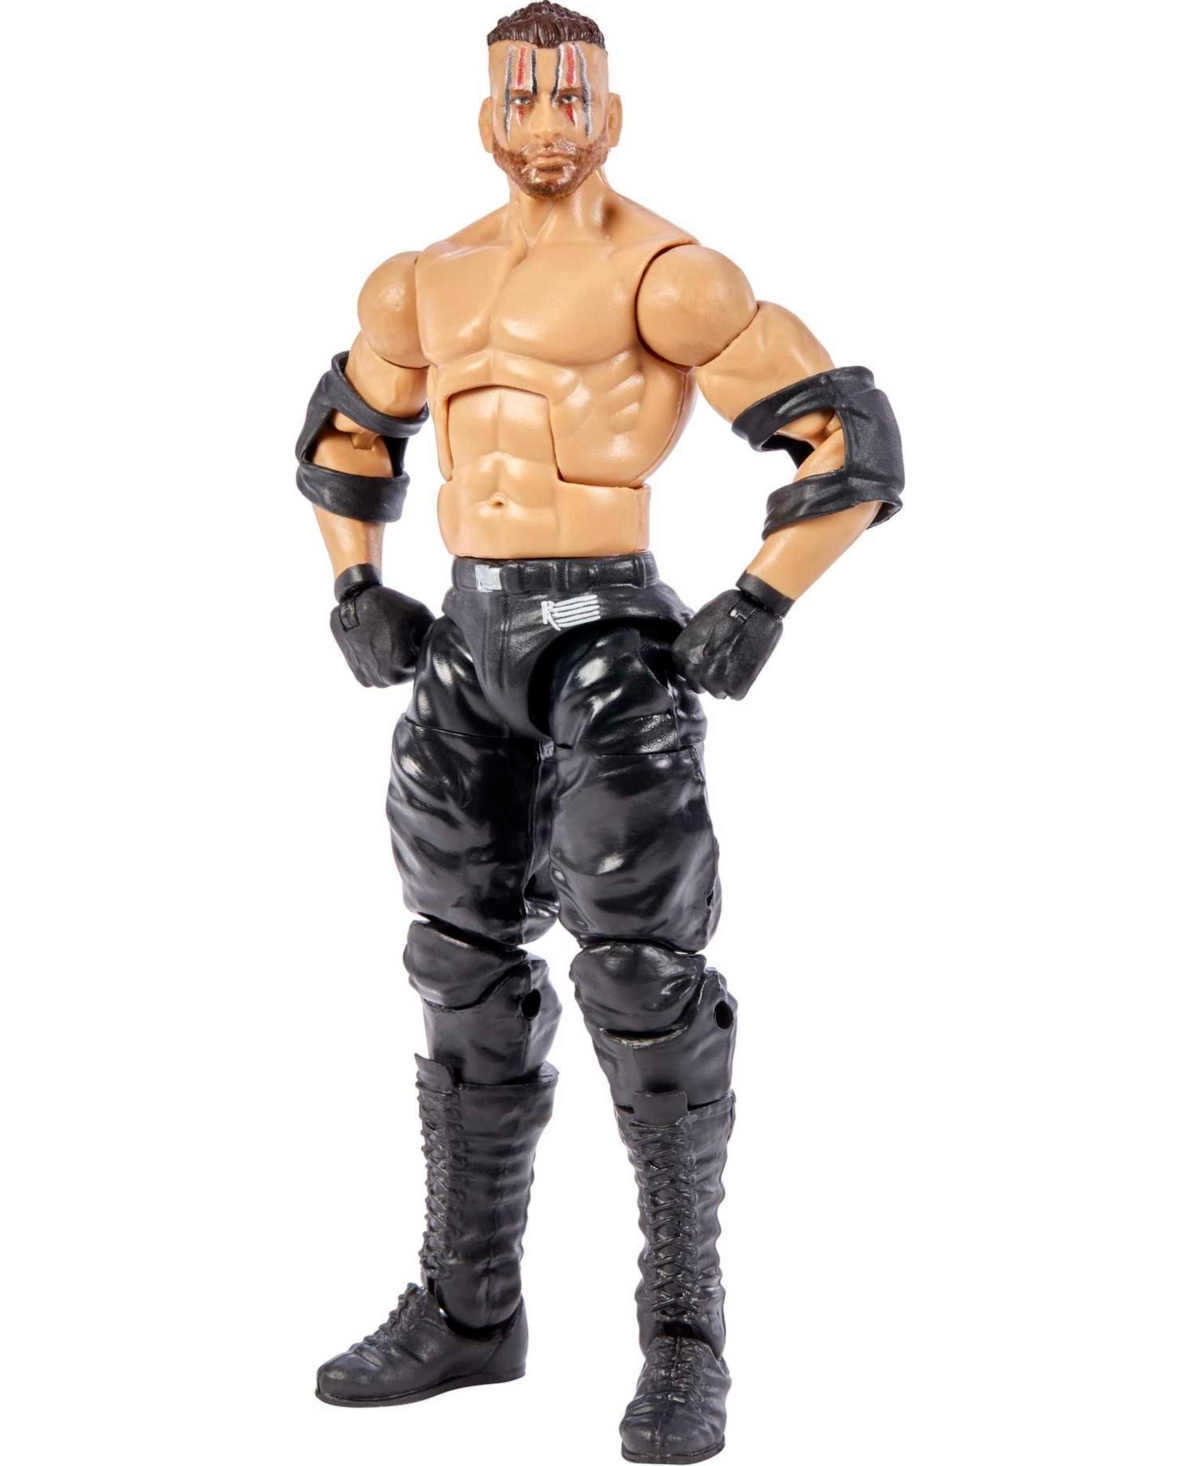 Shop Wwe Elite Collection Action Figure T-bar In Multi